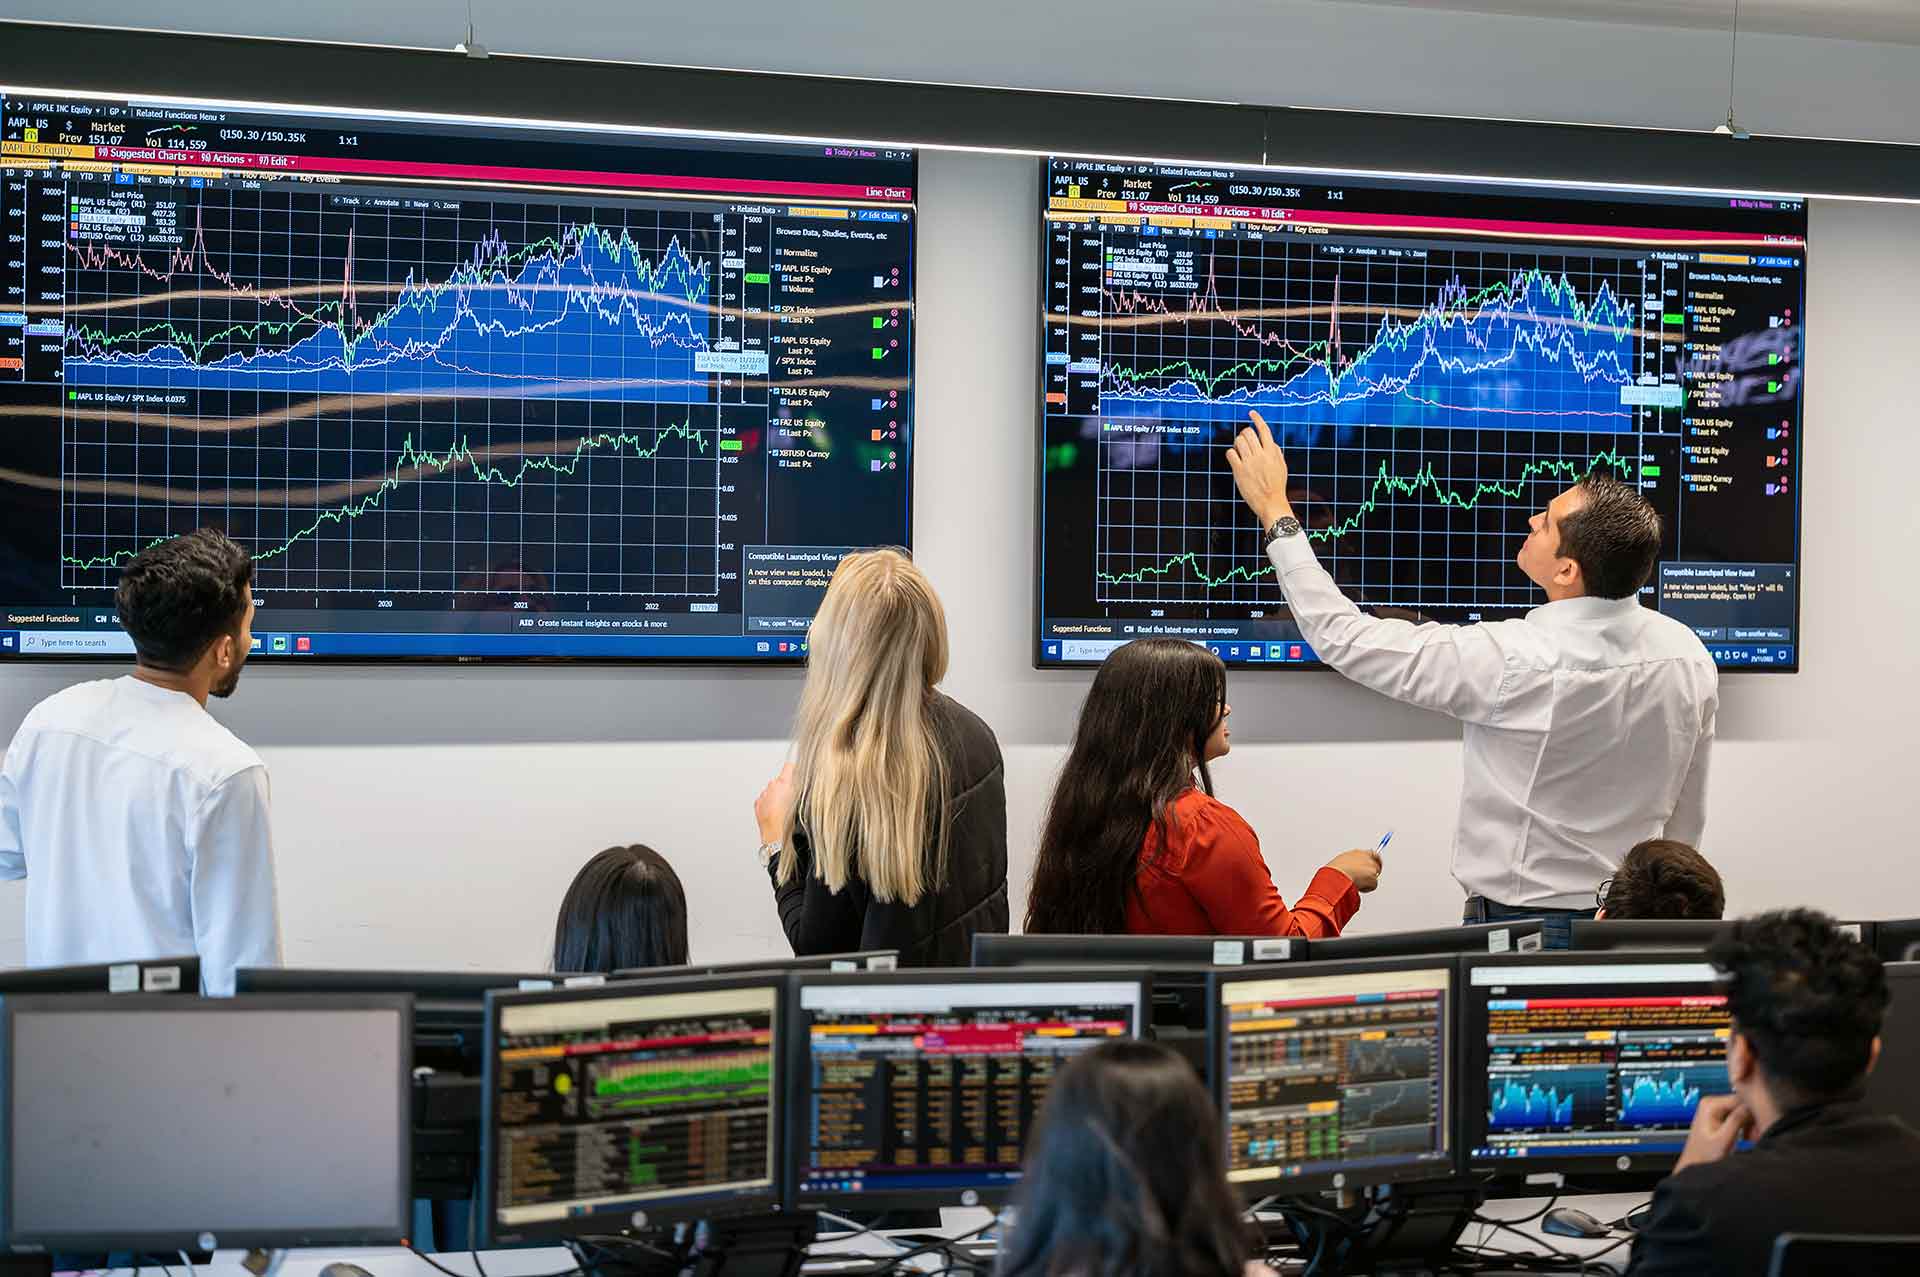 Students using the Bloomberg terminals and large screens